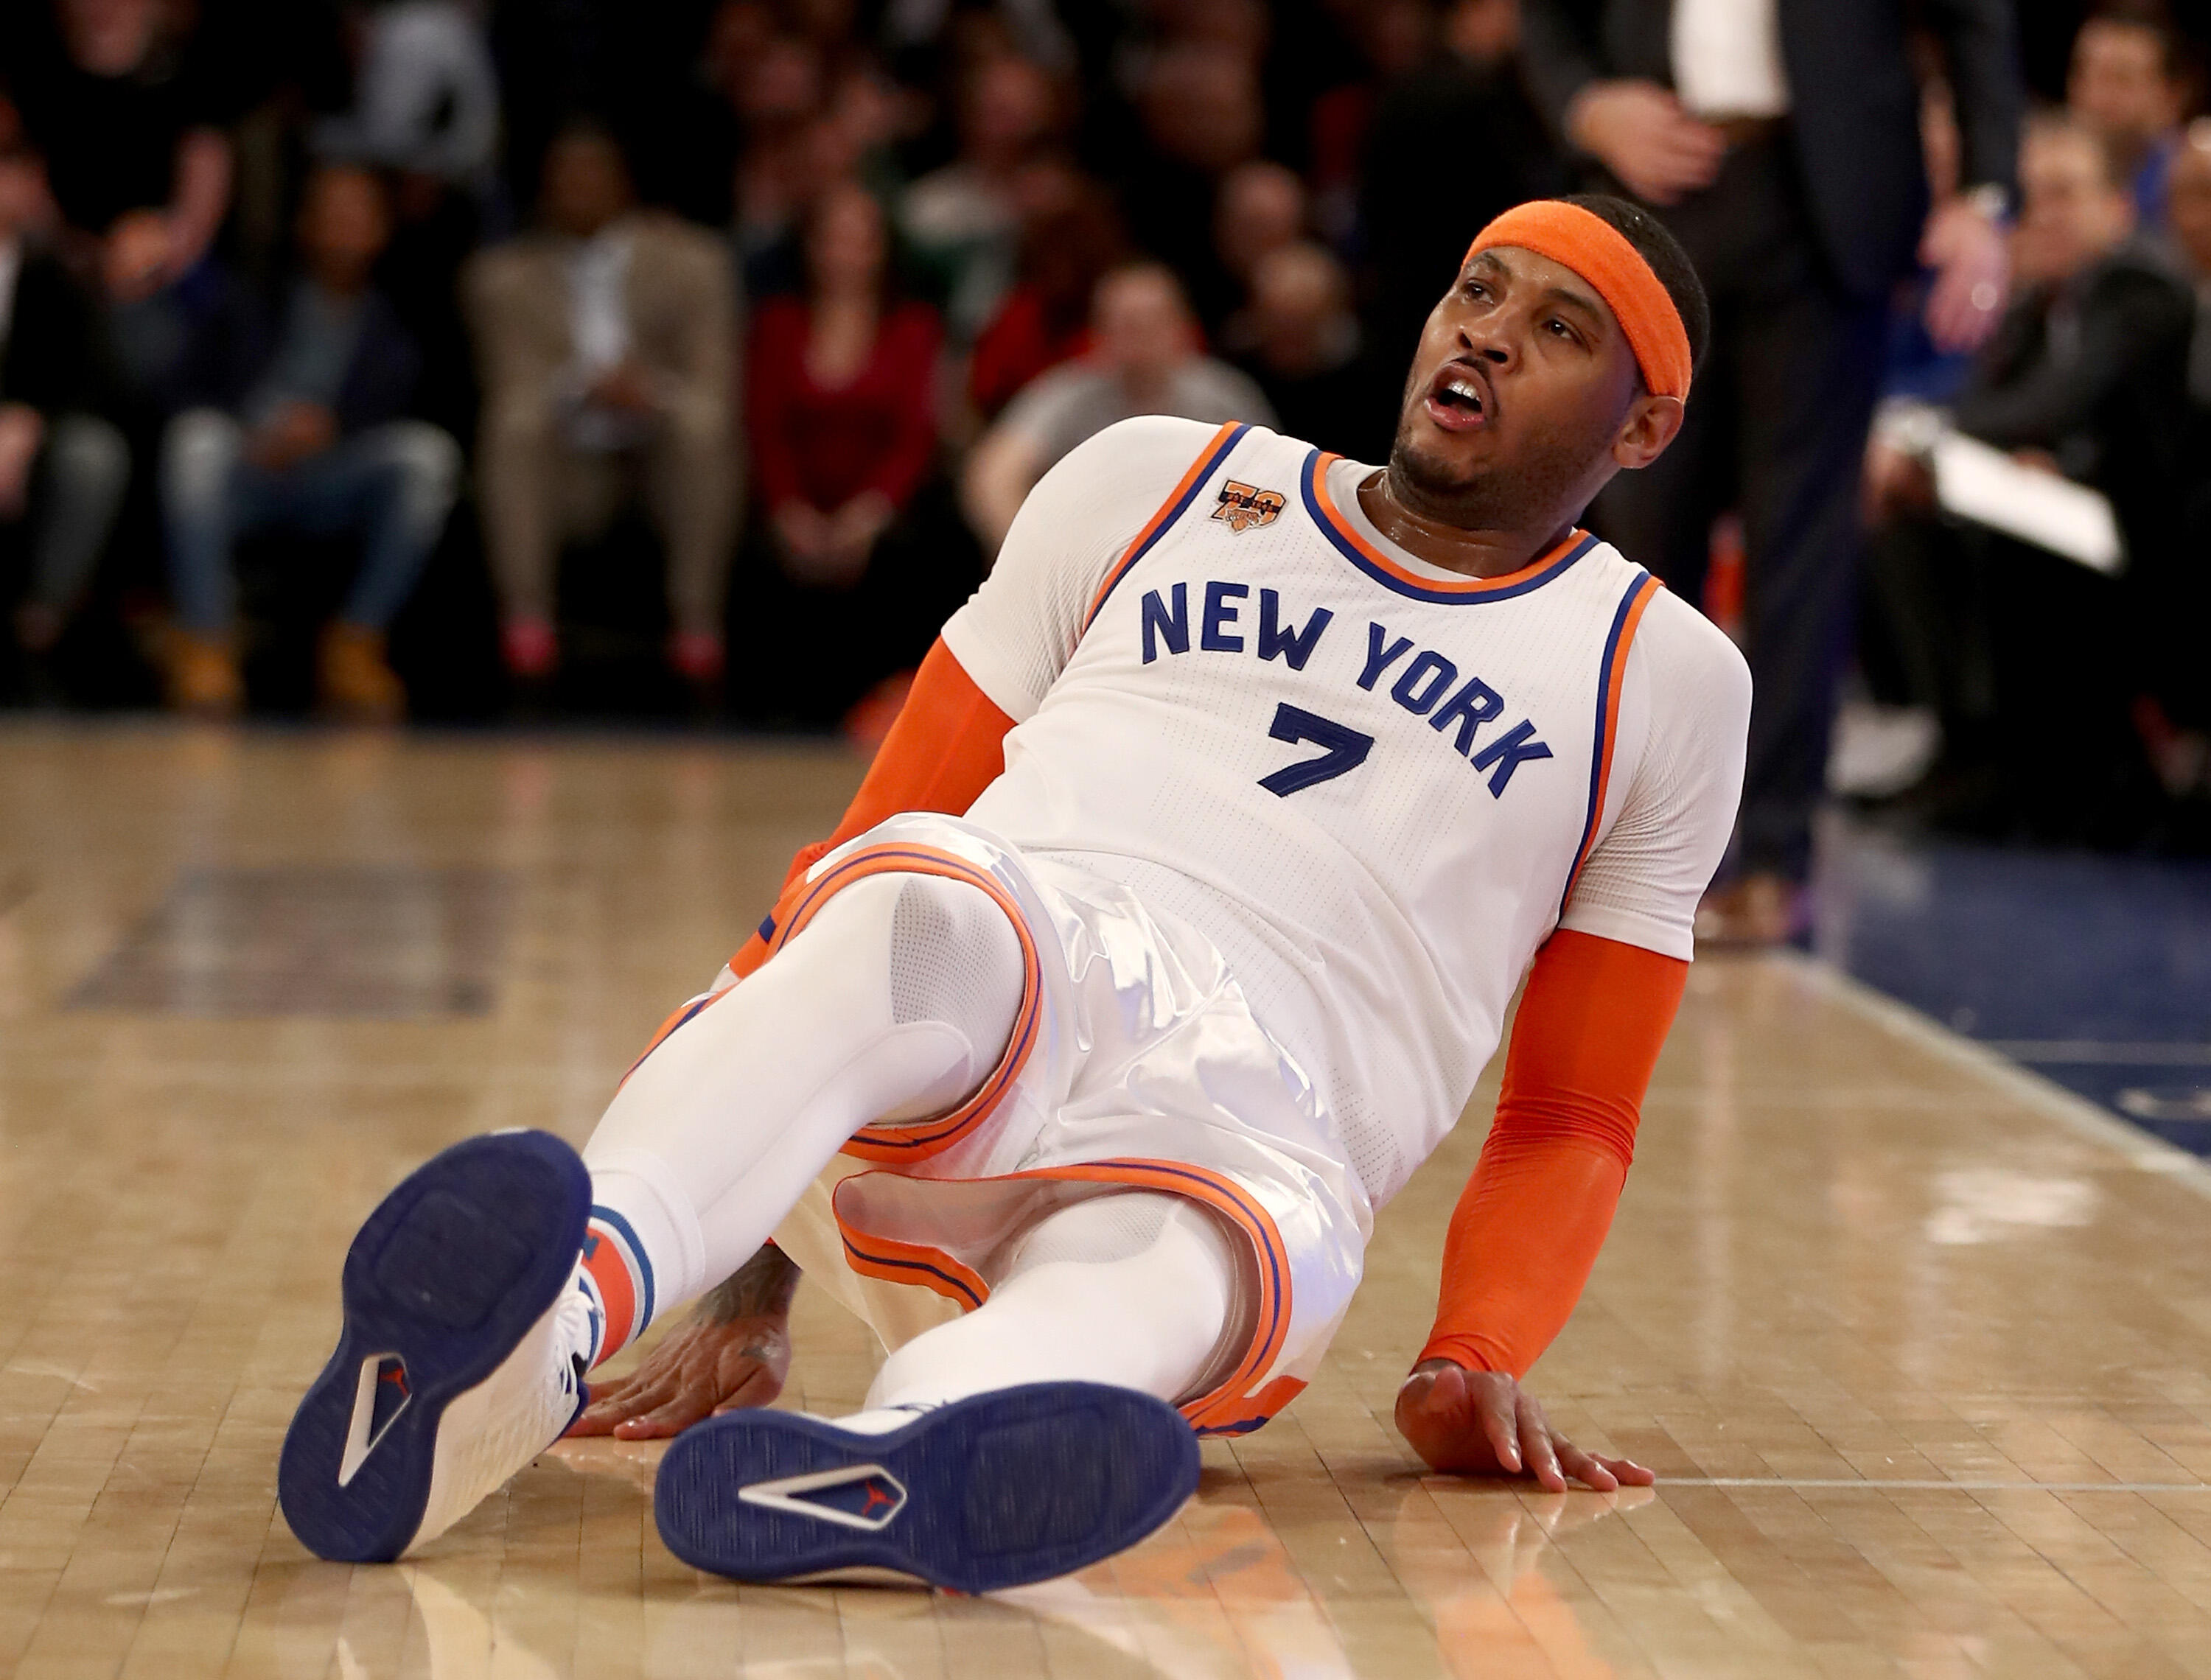 NEW YORK, NY - JANUARY 27:  Carmelo Anthony #7 of the New York Knicks falls as he follows through on a shot in the fourth quarter against the Charlotte Hornets at Madison Square Garden on January 27, 2017 in New York City. NOTE TO USER: User expressly ack